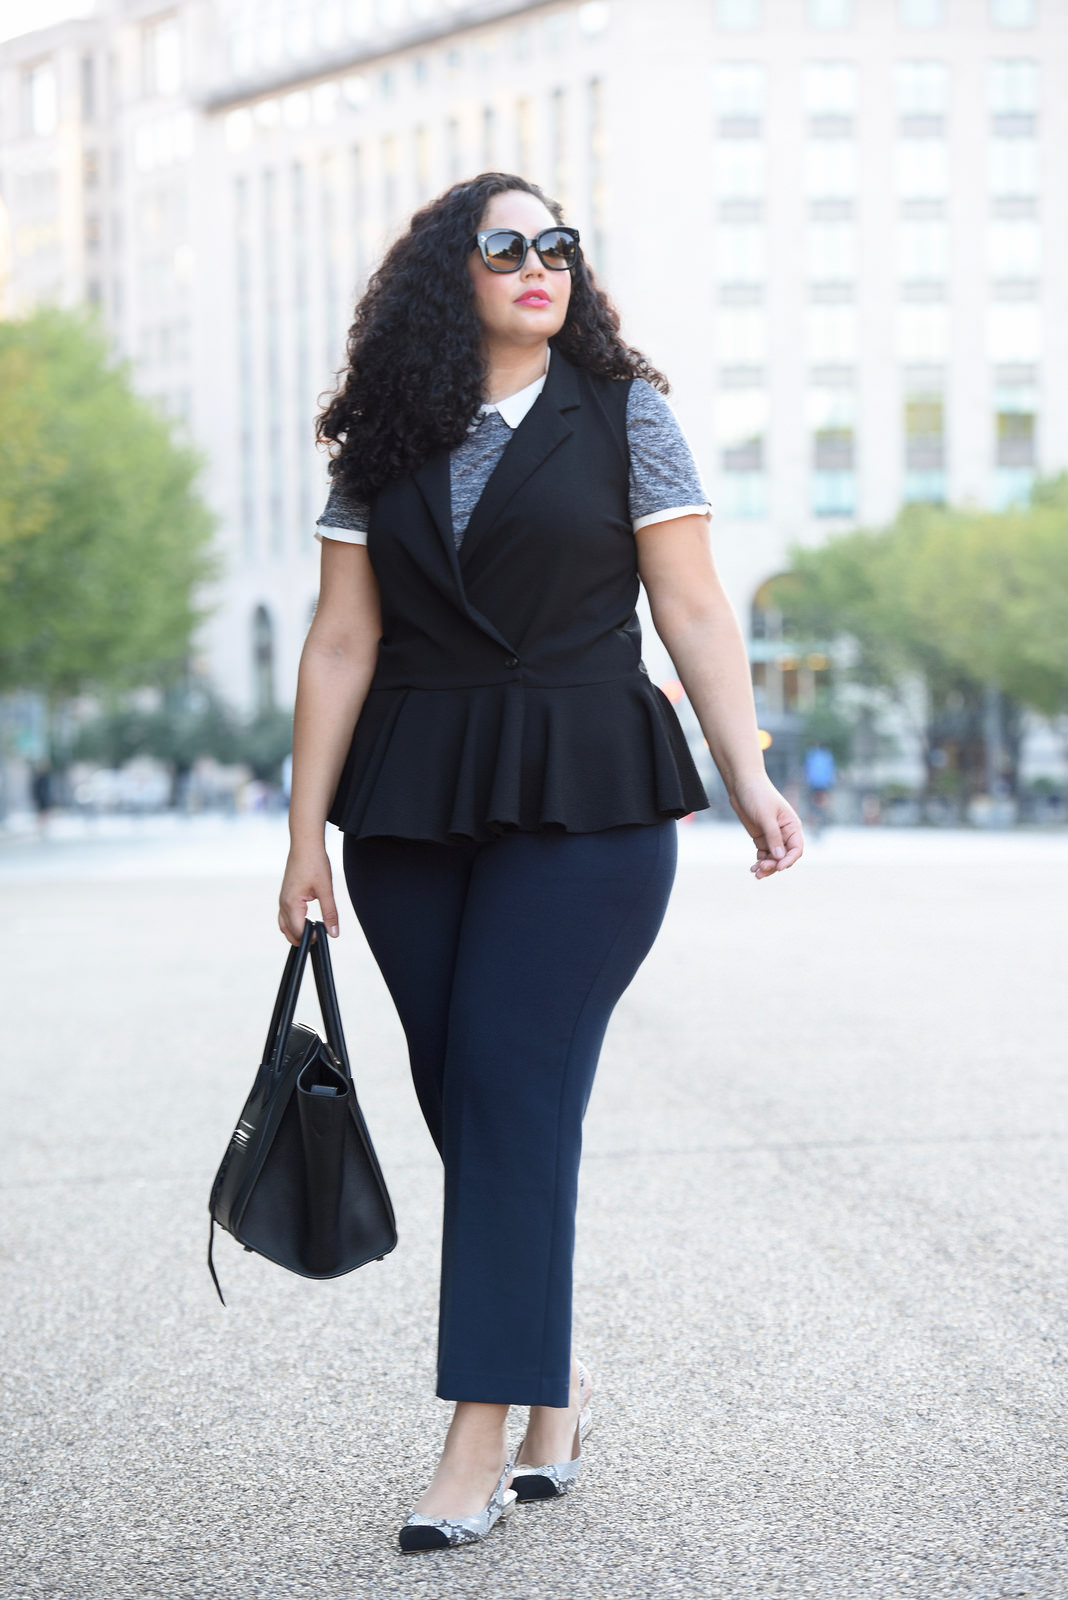 Peplum vest, collared blouse, wide leg cropped pants, slingback flats and Celine Phantom worn by Tanesha Awasthi of Girl With Curves.